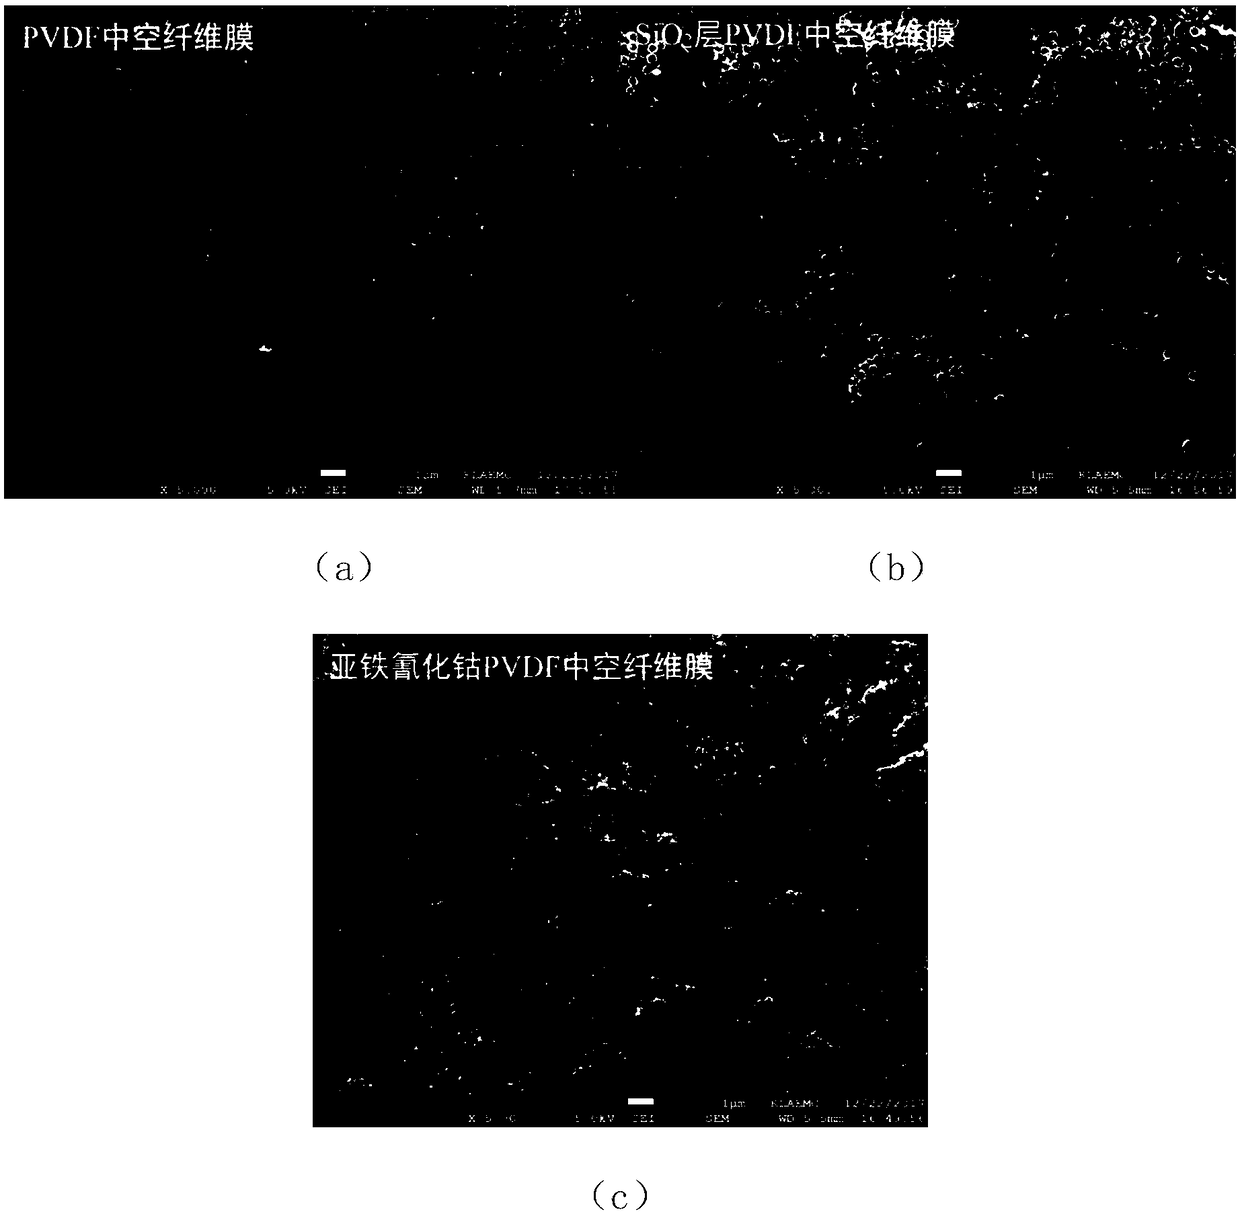 Cobaltous ferrocyanide PVDF (poly(vinylidene fluoride)) hollow fibrous membrane as well as preparation method and use thereof